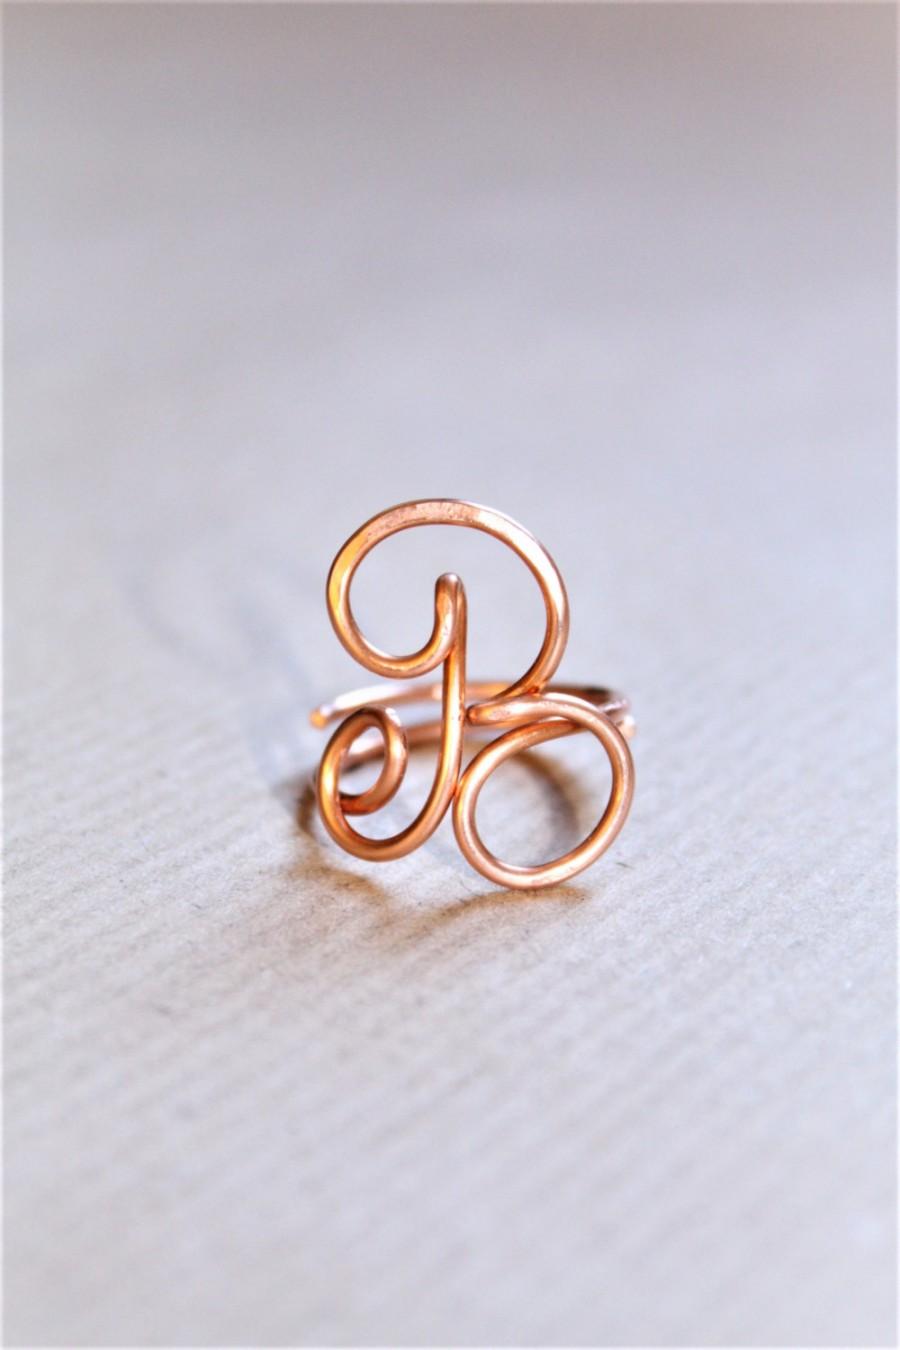 Hochzeit - Initial ring, letter A B F ring, personalized wire initial ring, wire ring, personalized ring, adjustable ring, wire letters, letter ring